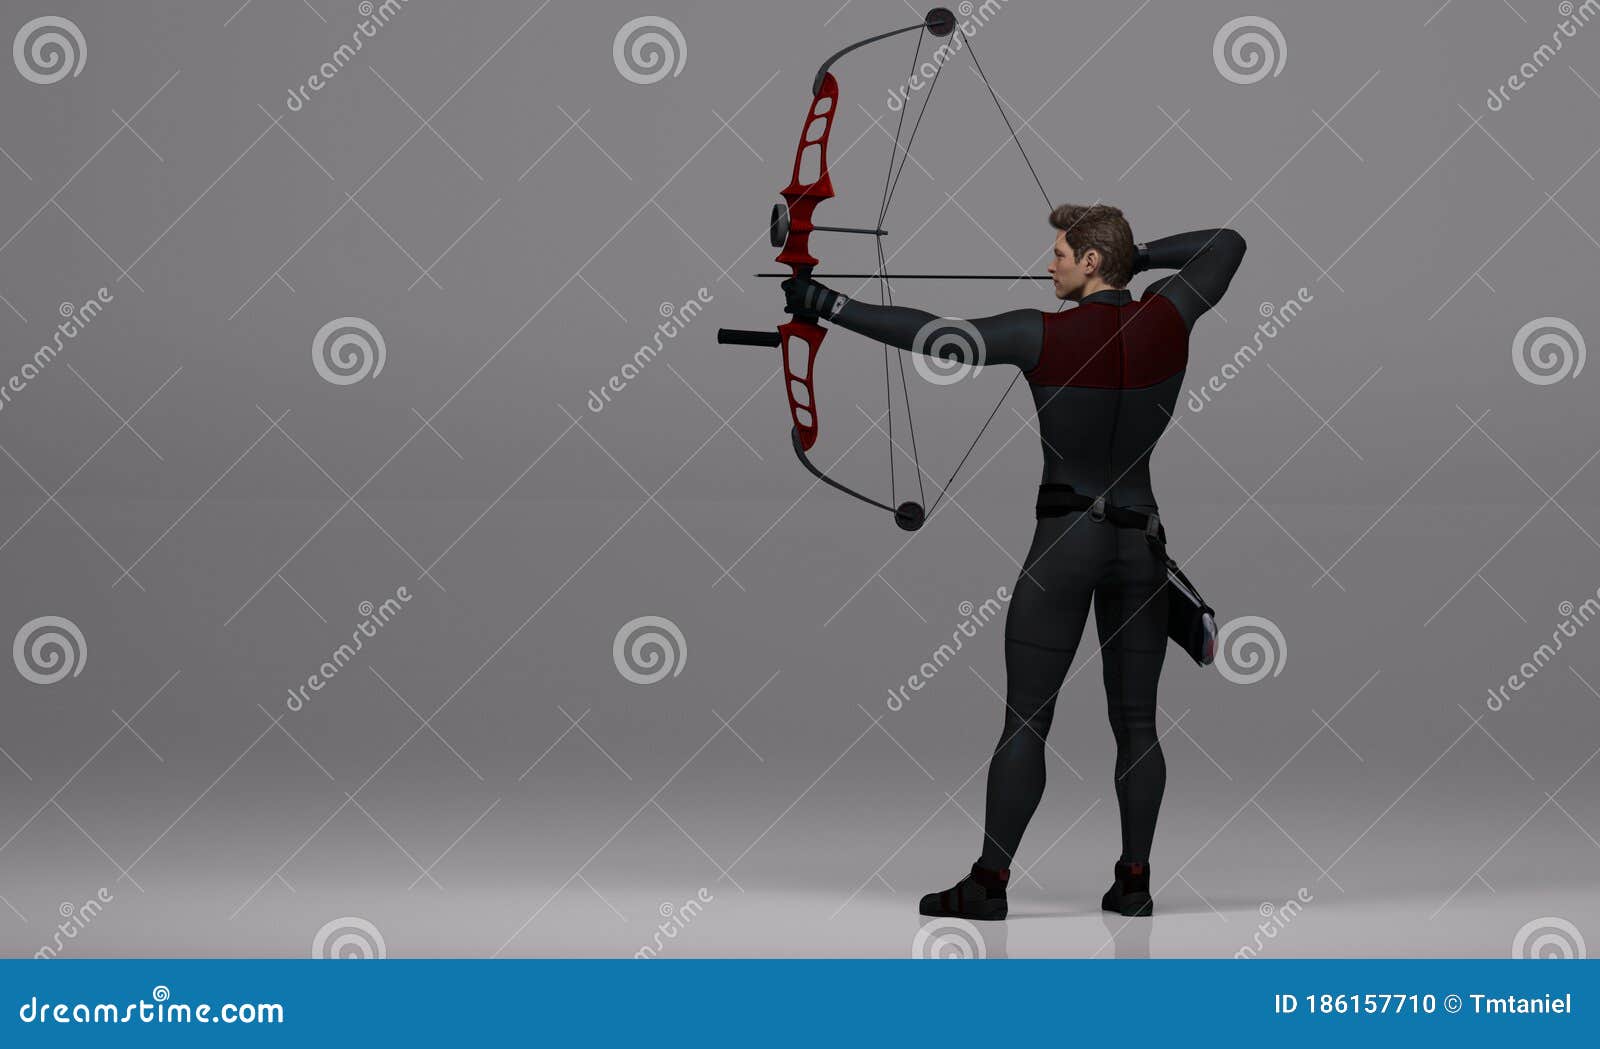 Bow aiming pose - Google Search | Pose reference, Male pose reference,  Human poses reference